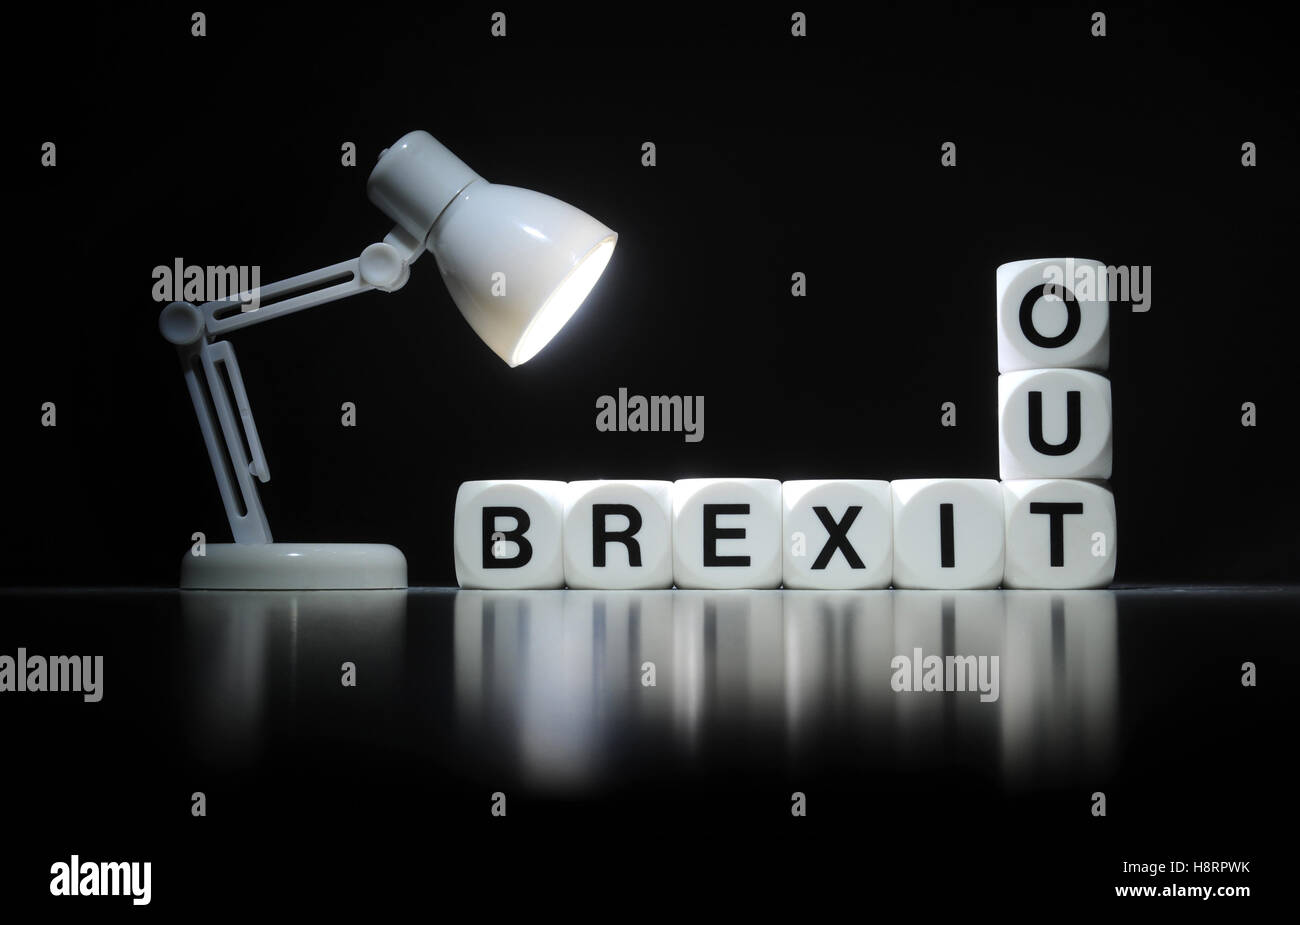 WORD DICE SPELLING 'BREXIT' AND 'OUT' WITH SPOTLIGHT RE BREXIT THE EUROPEAN UNION LEAVE VOTE REFERENDUM BRITISH BRITAIN EU UK Stock Photo